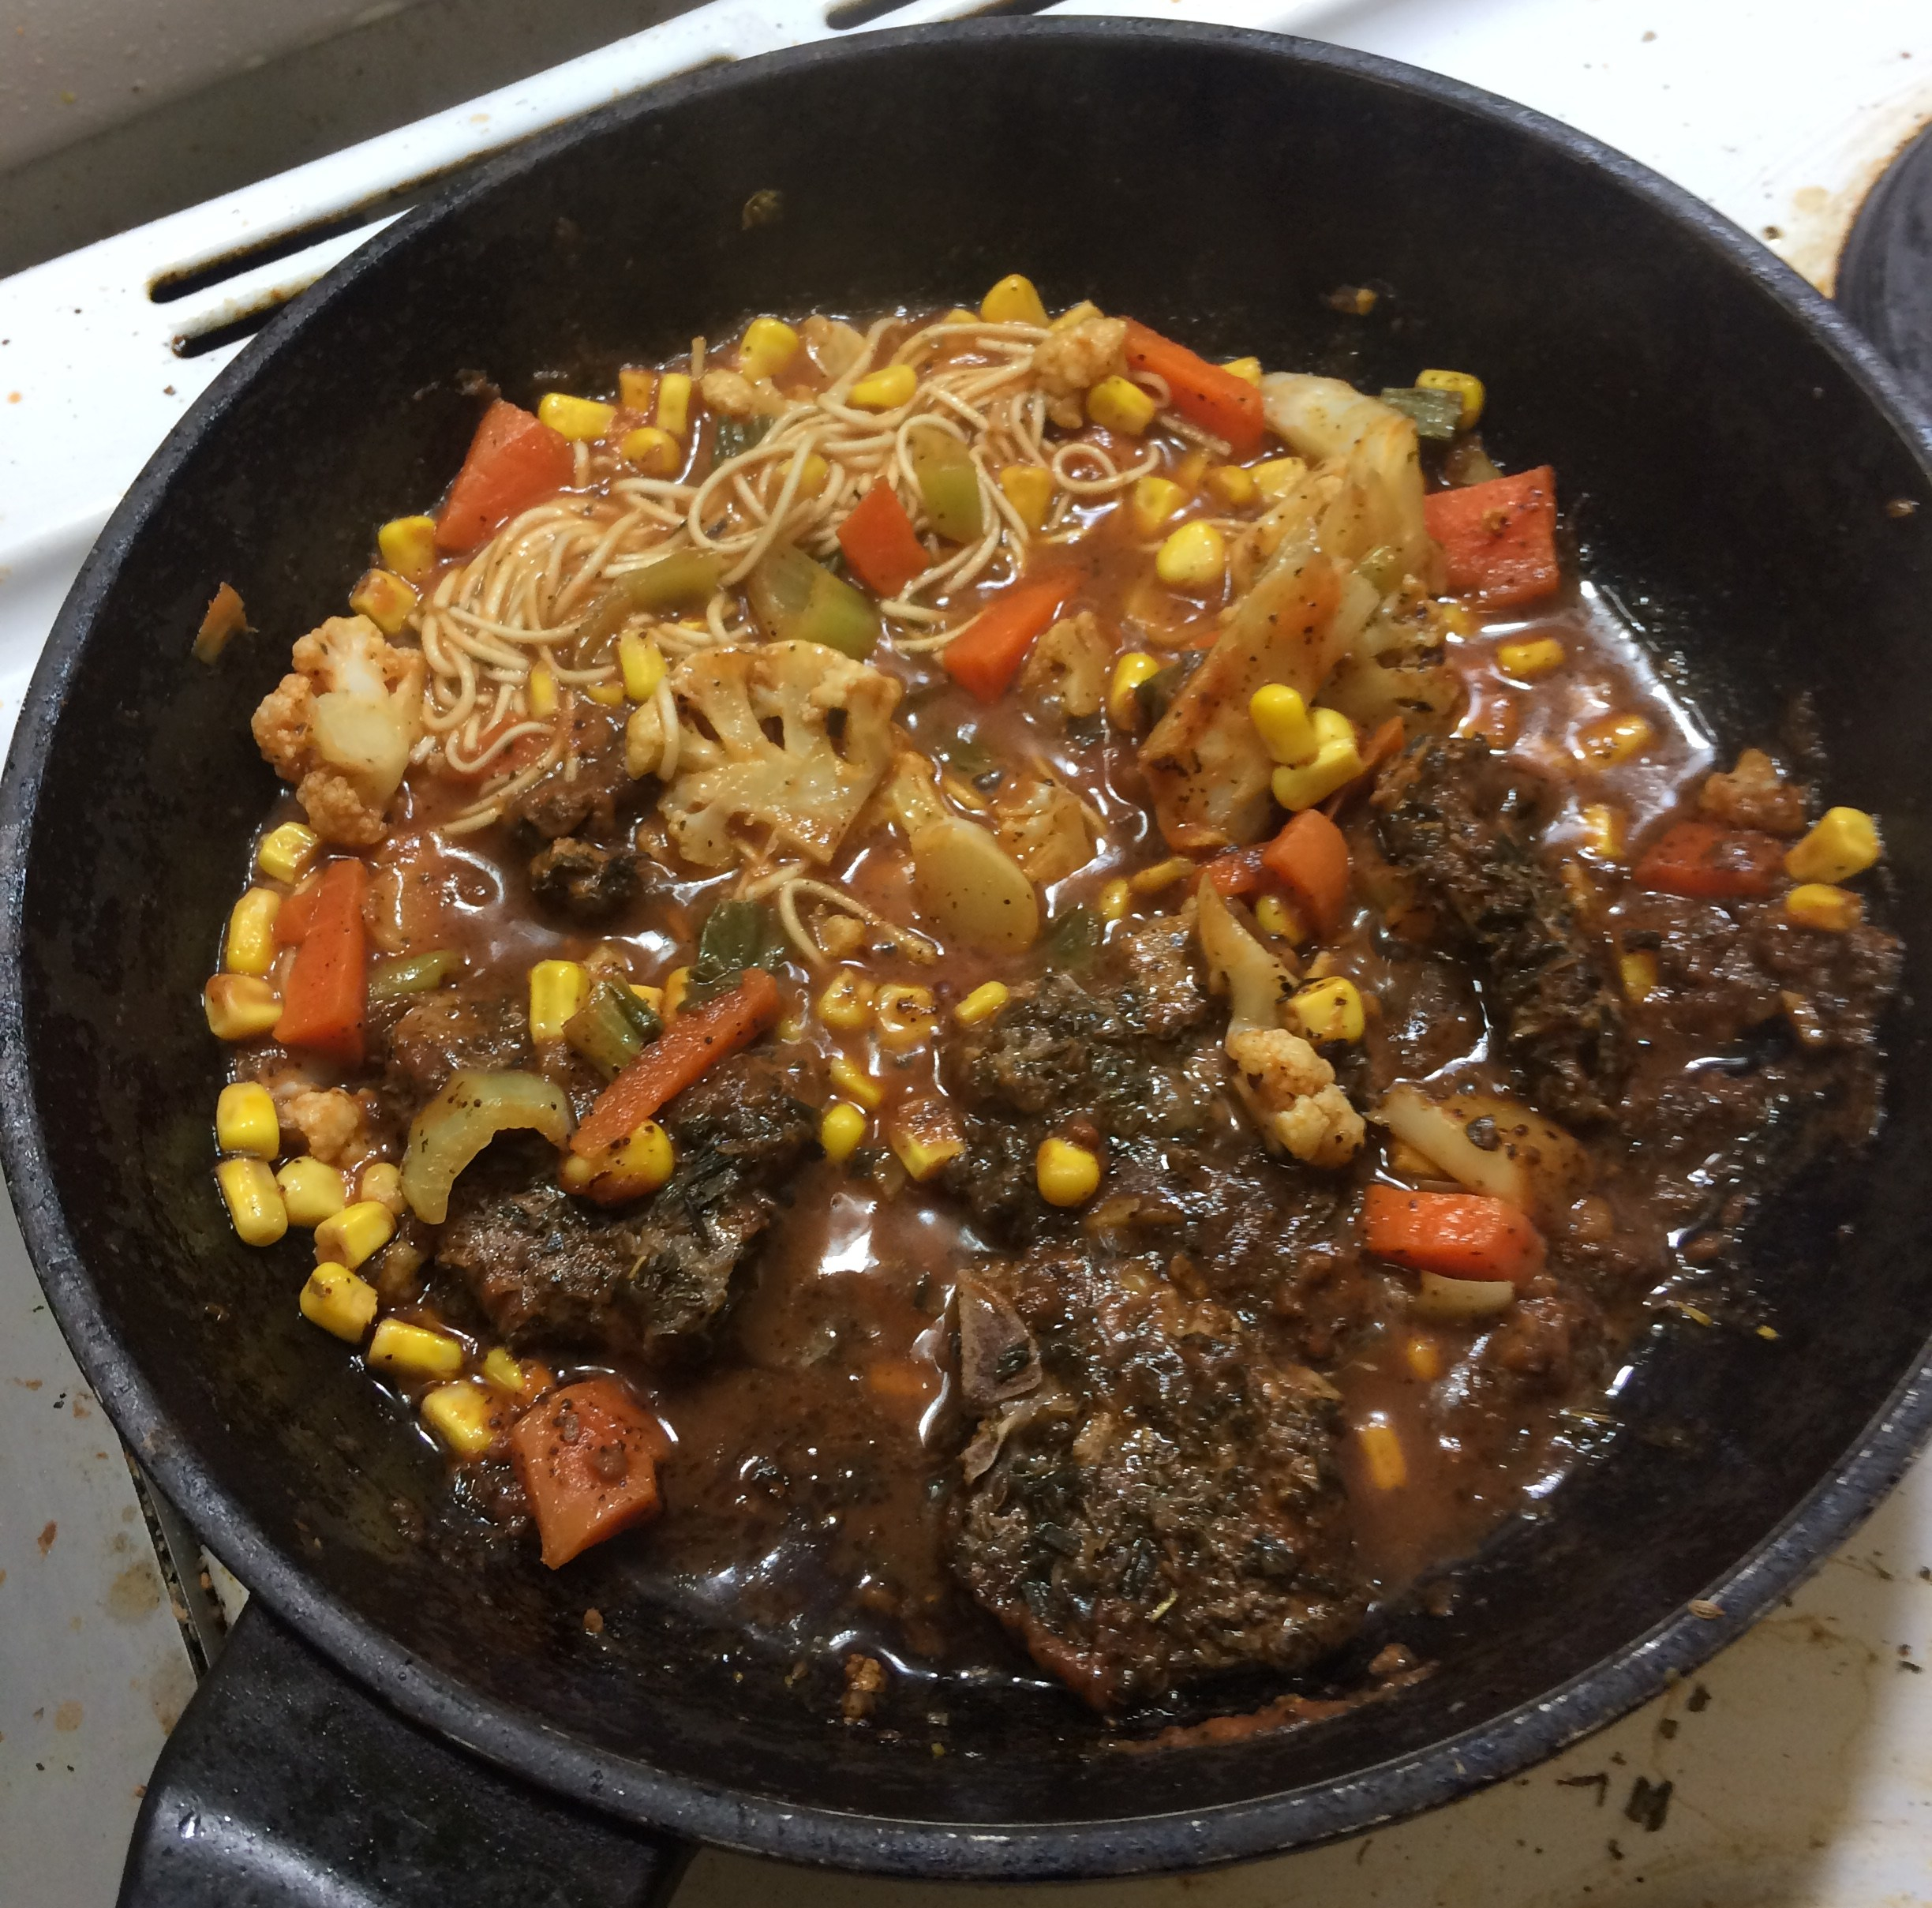 In a deep black frying pan are chops in a red tomatoey sauce with carrots, corn, bok choi and cauliflower with noodles stirred through